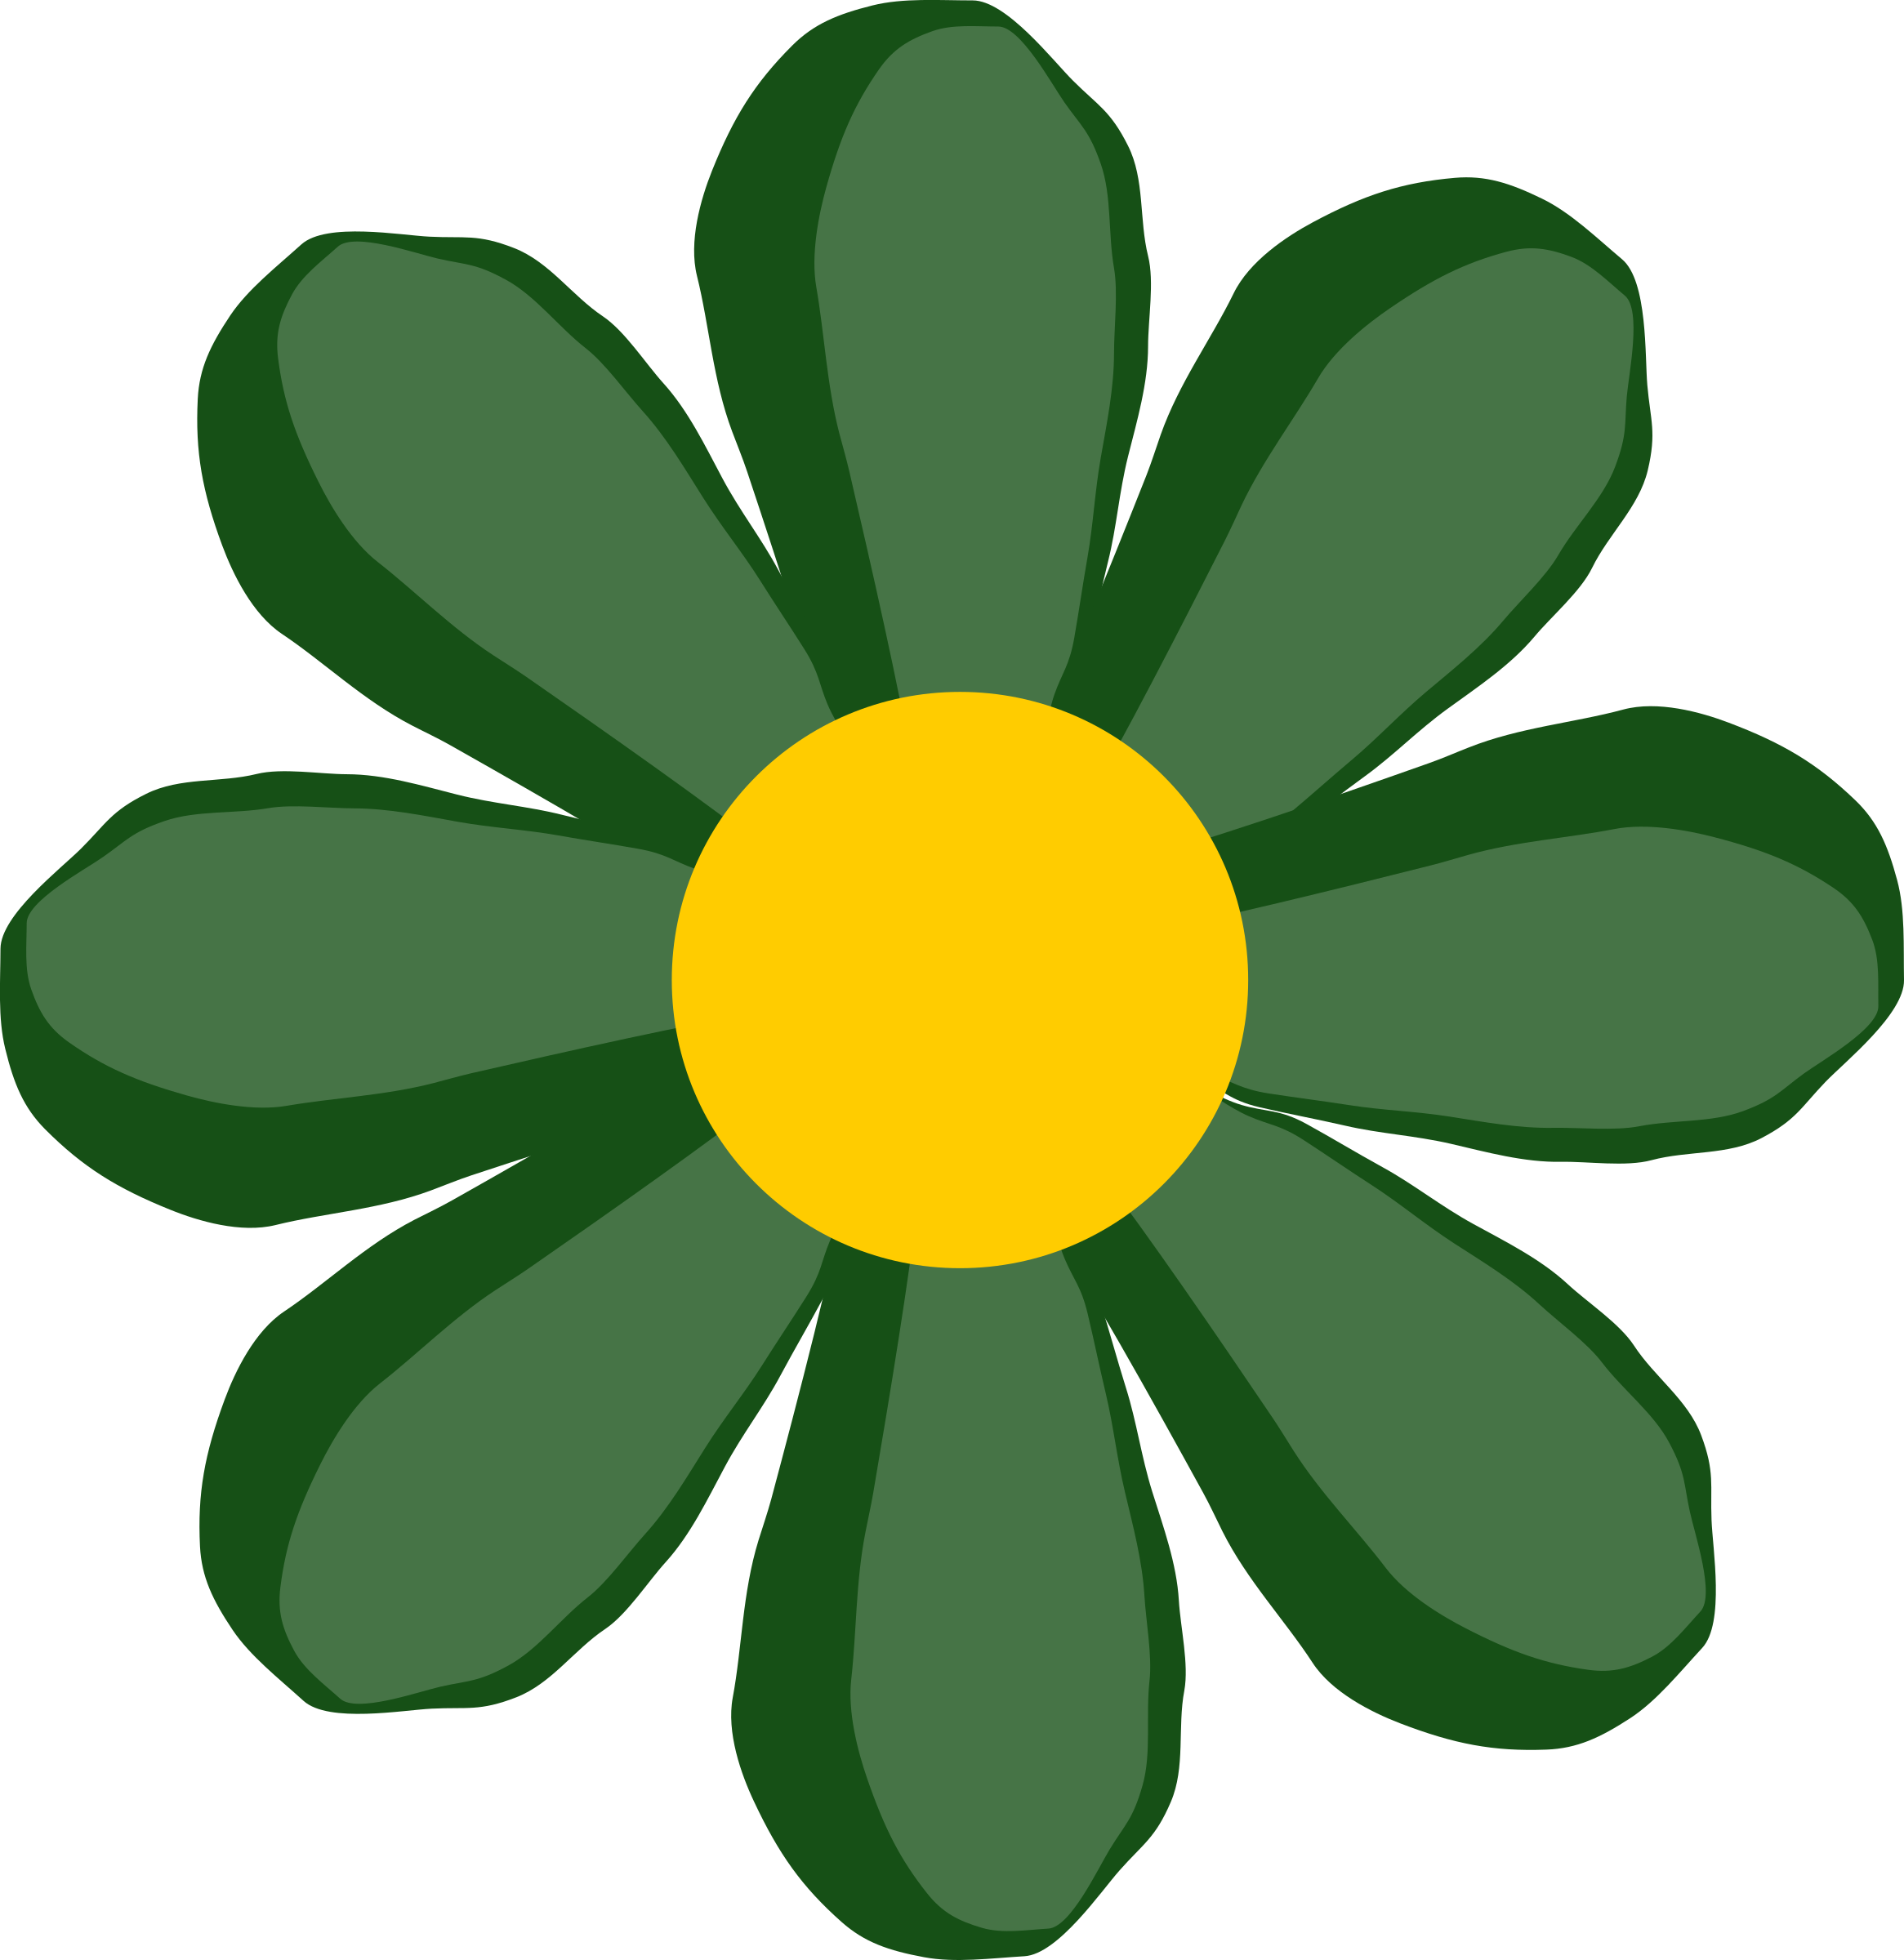 Green big image png. Microsoft clipart gallery flower